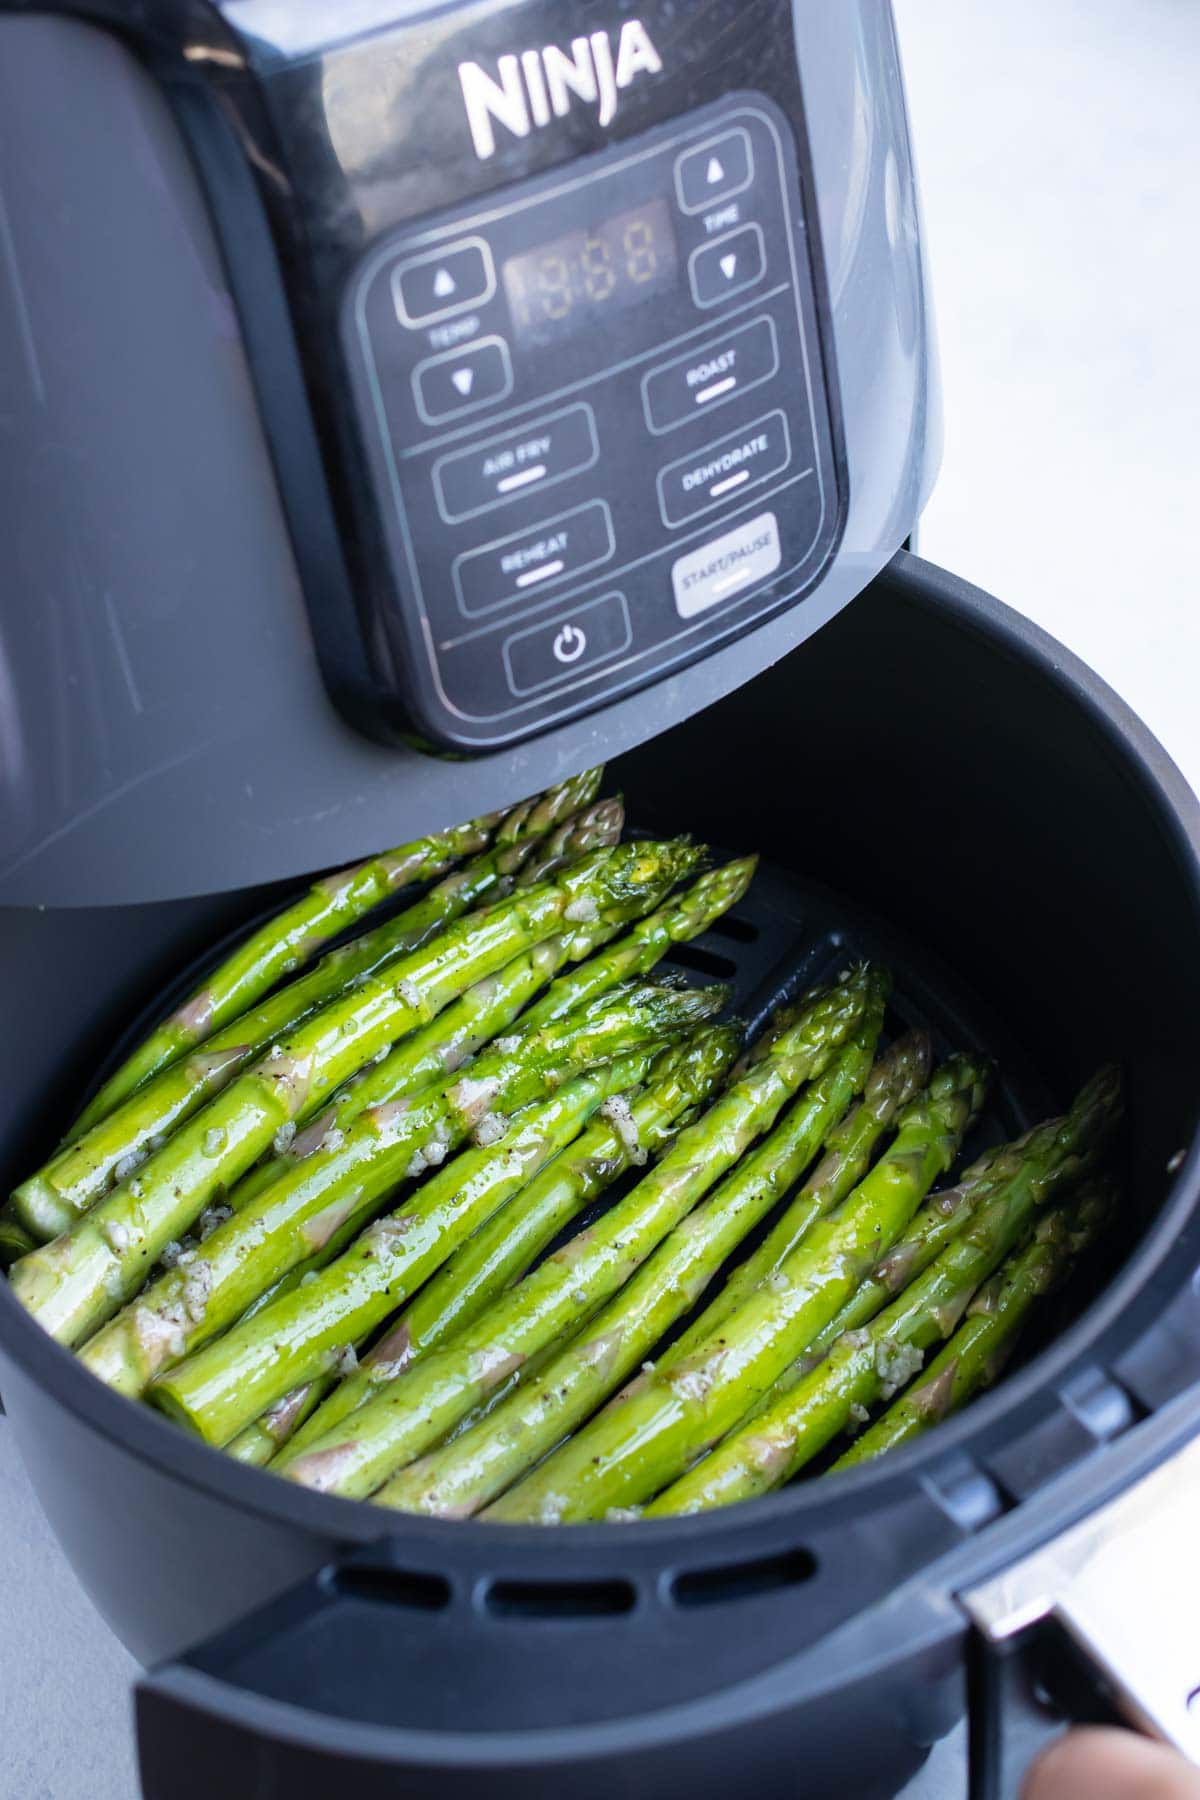 Prepped asparagus is placed in the air fryer for cooking.